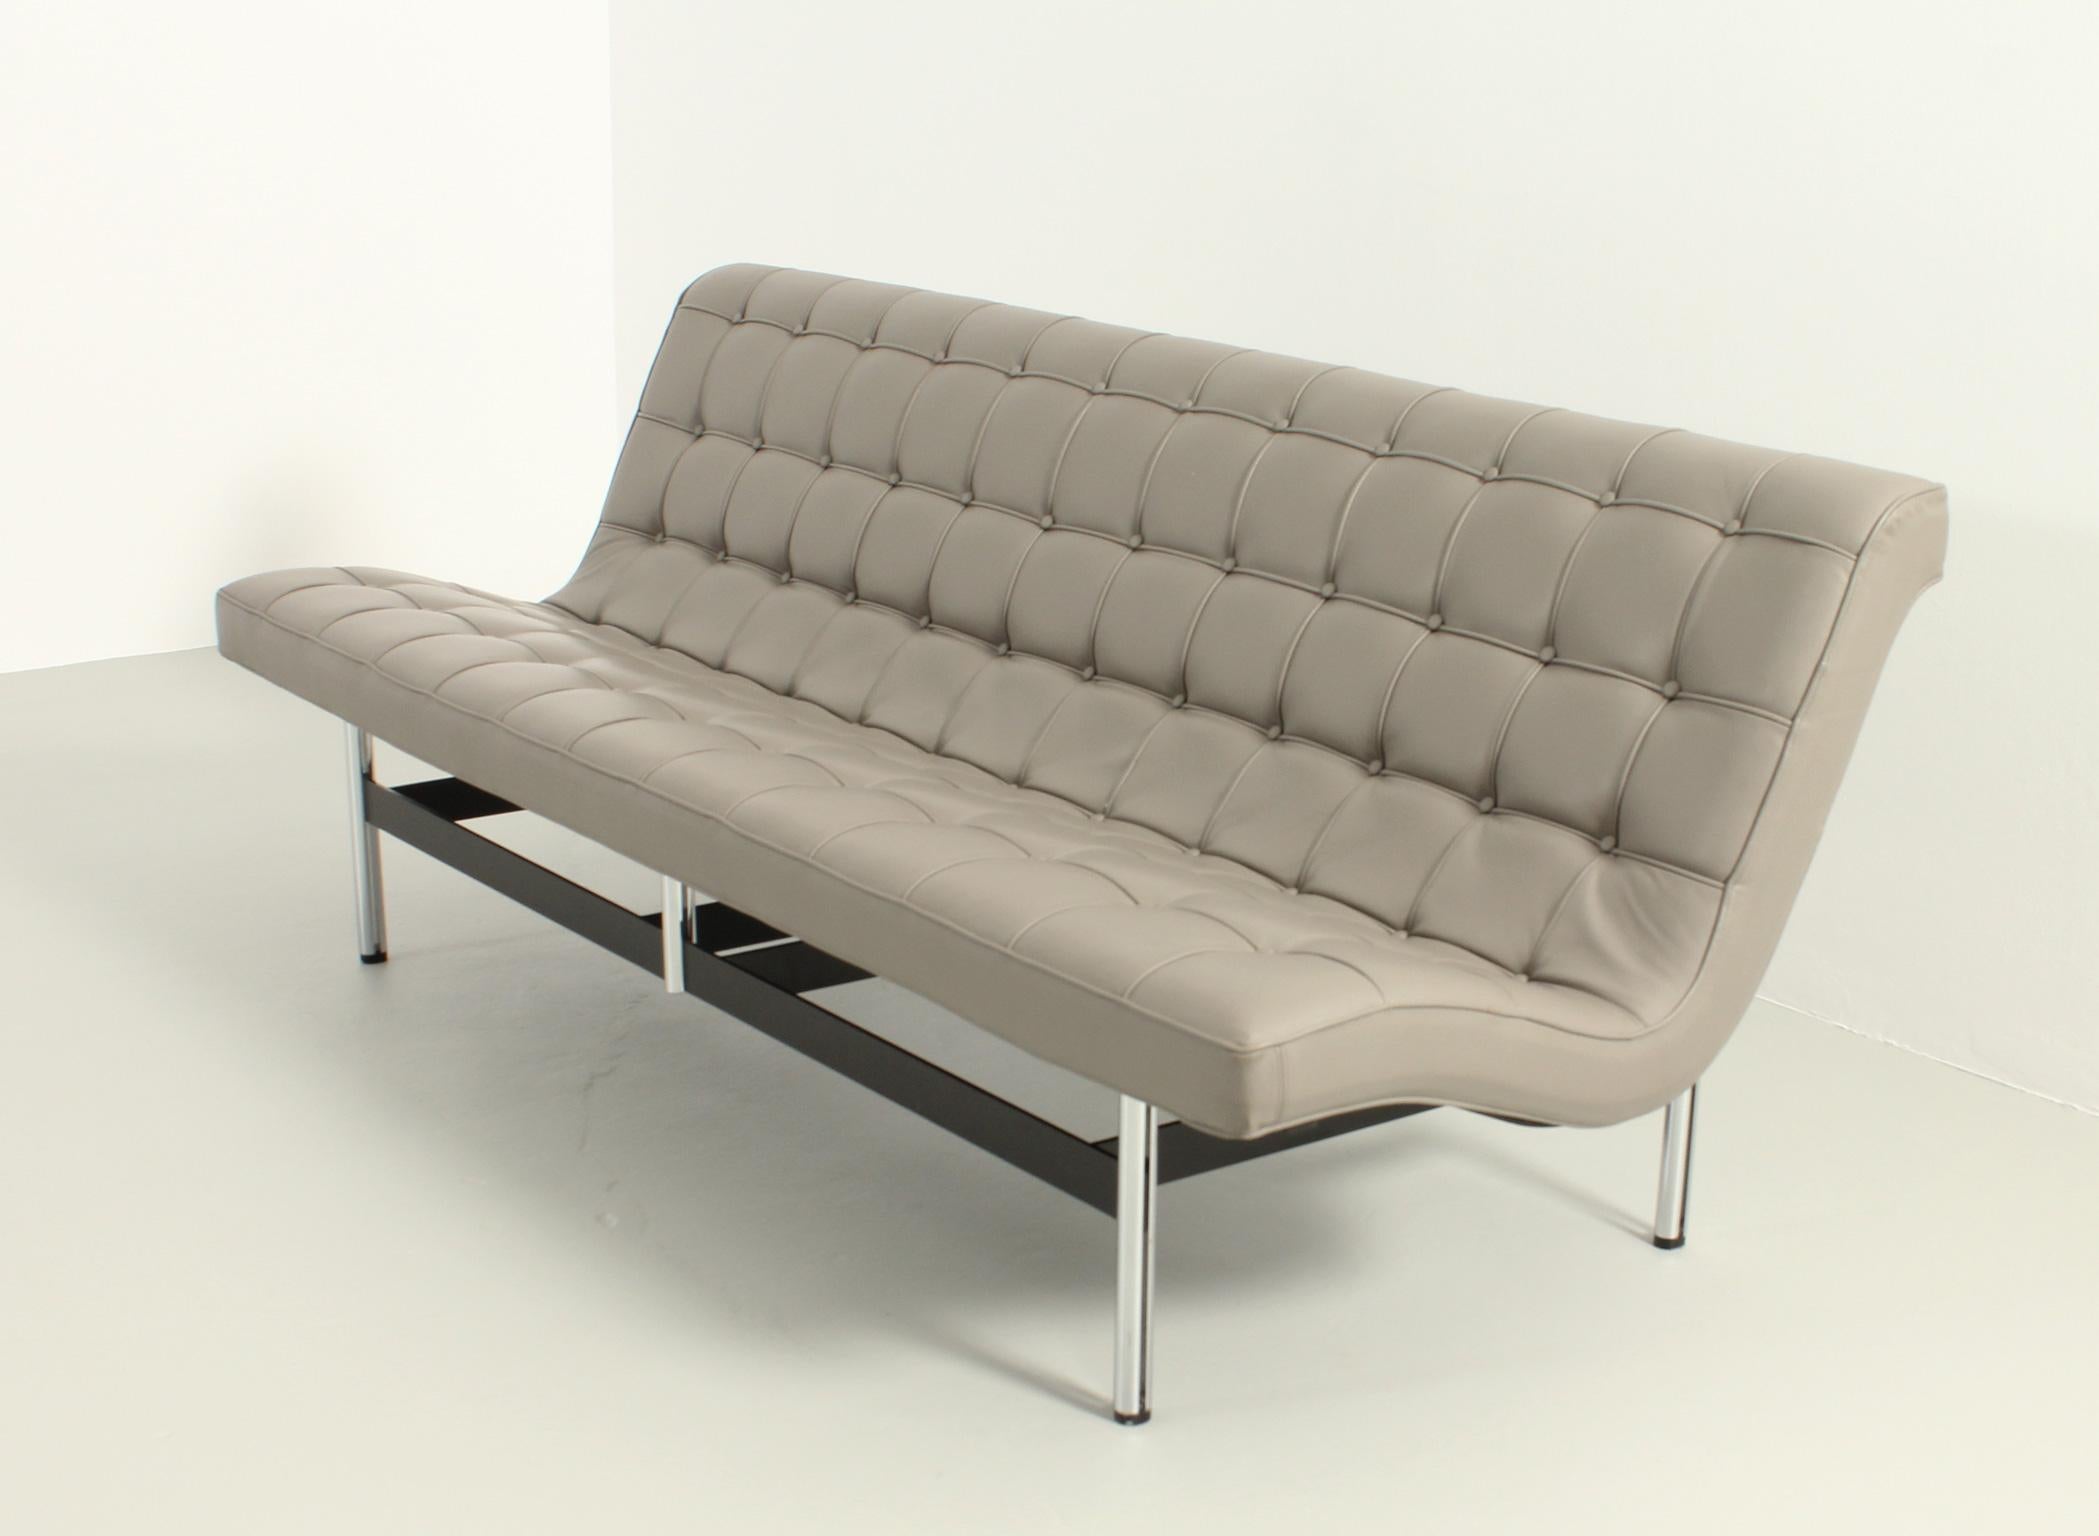 International Style New York Sofa by Katavolos, Litell and Kelley For Sale